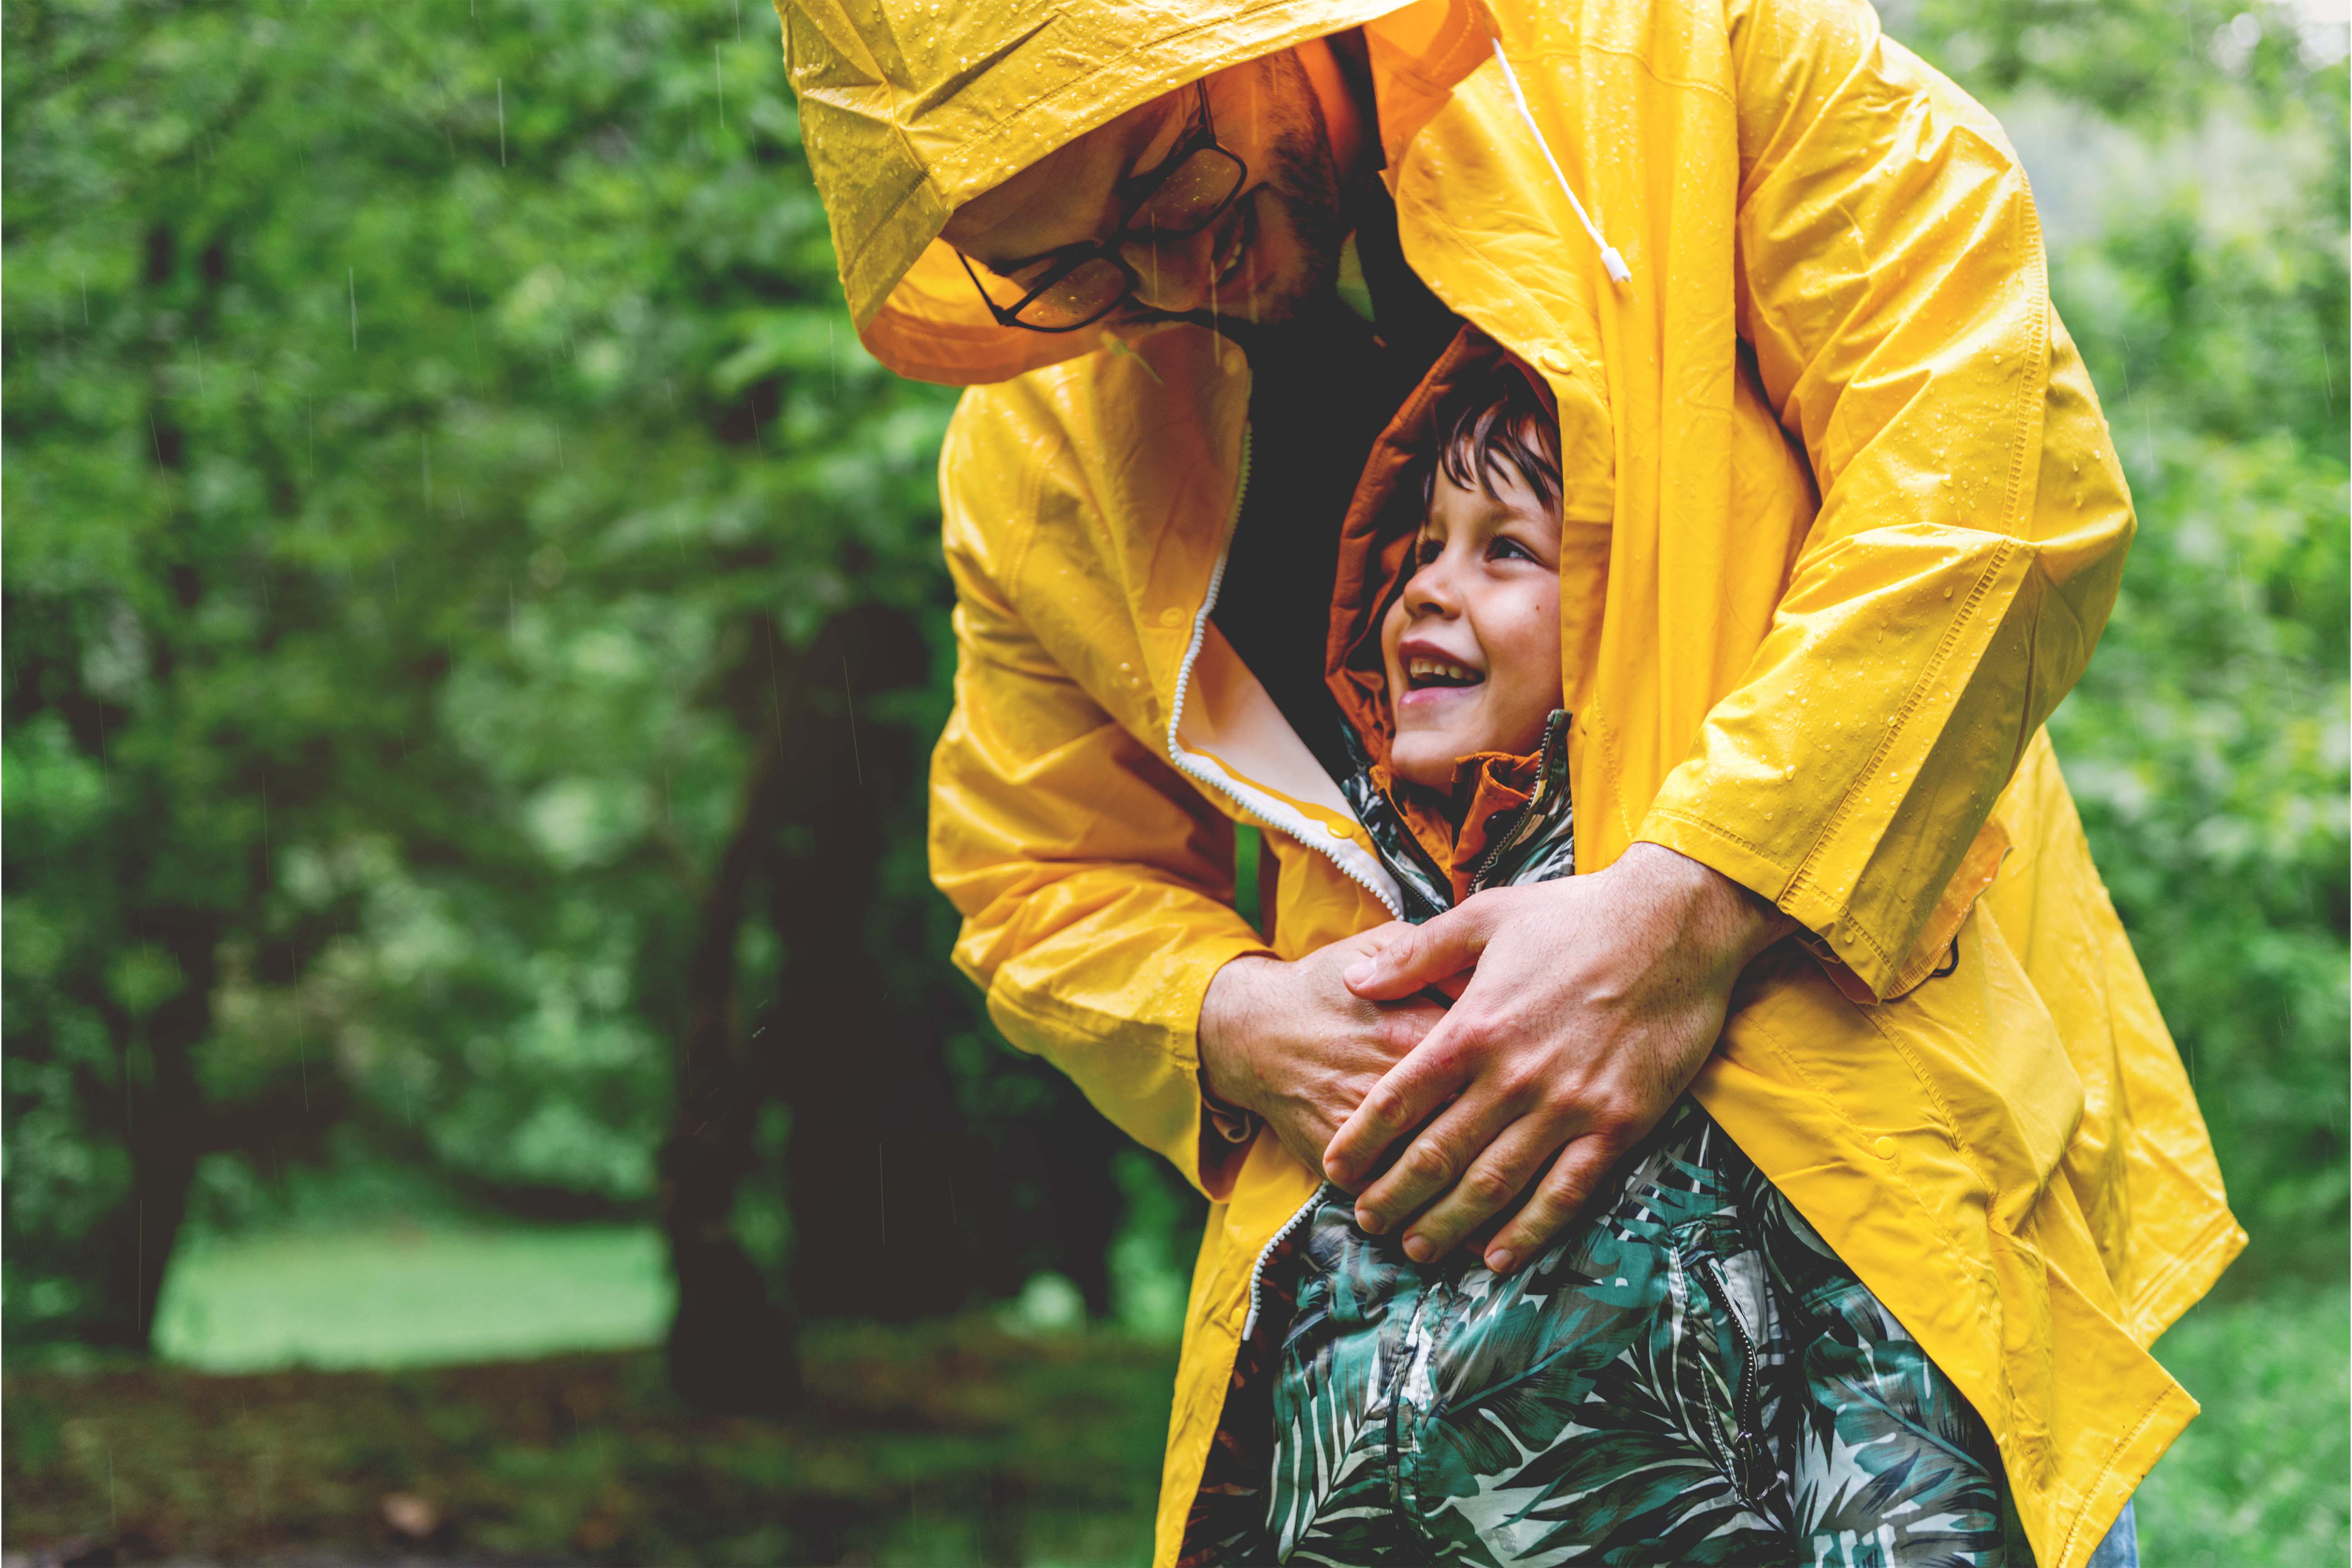 A father and his son enjoying the rains and wearing raincoats